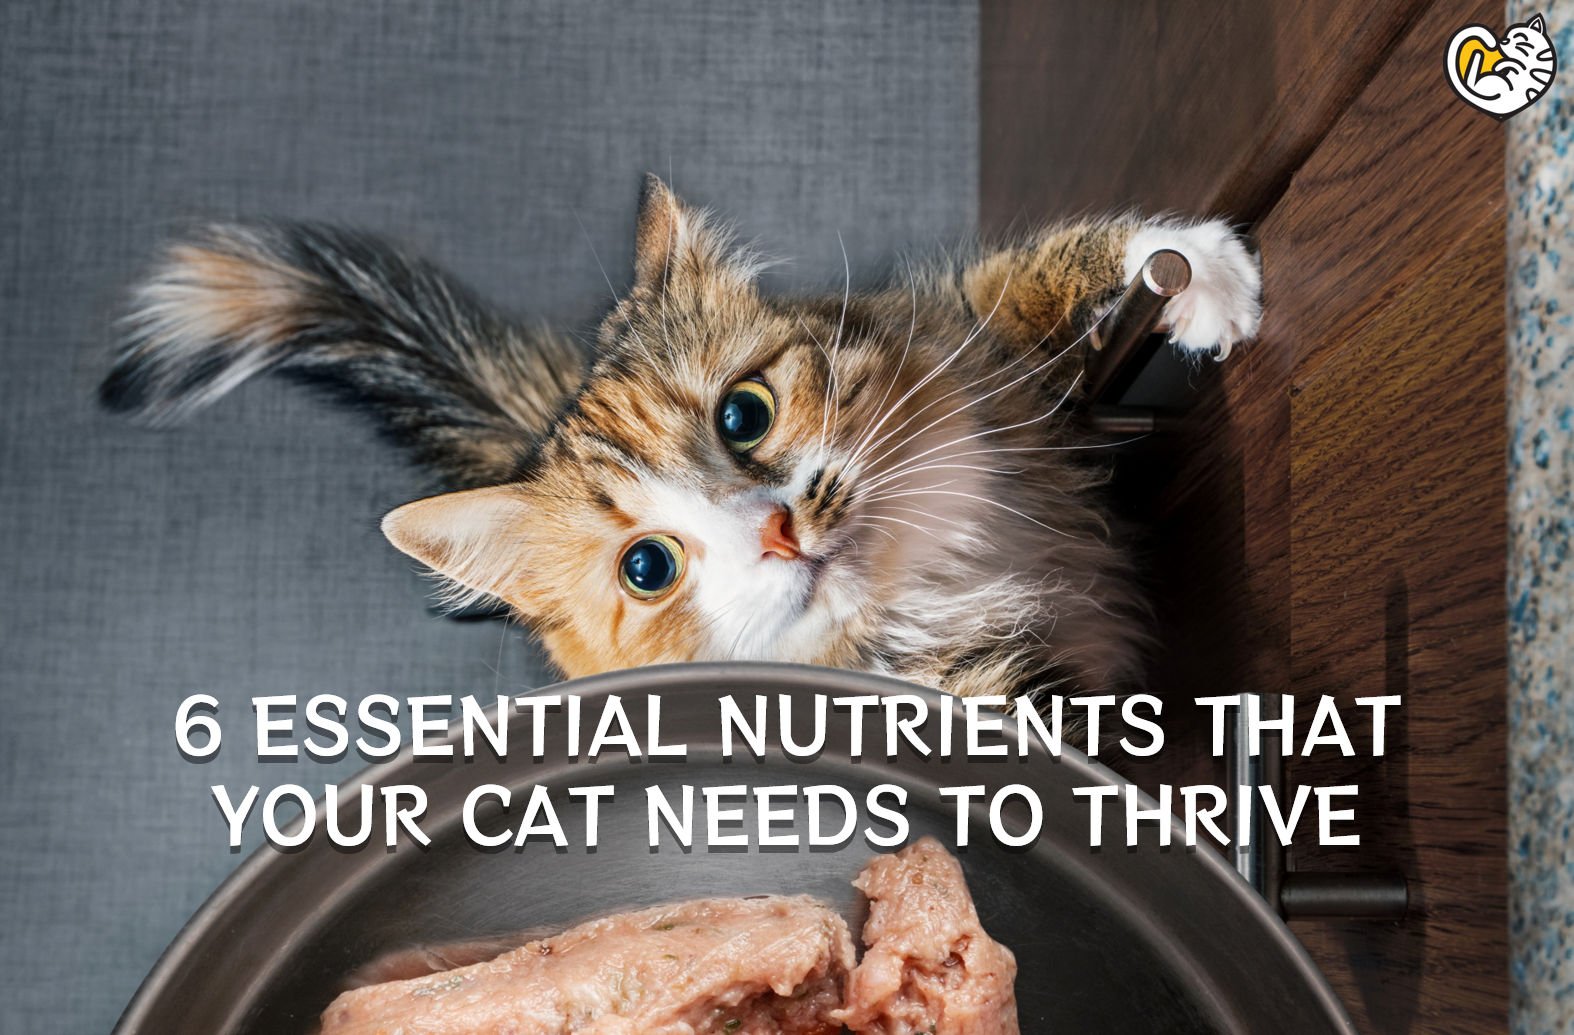 6 ESSENTIAL NUTRIENTS THAT YOUR CAT NEEDS TO THRIVE